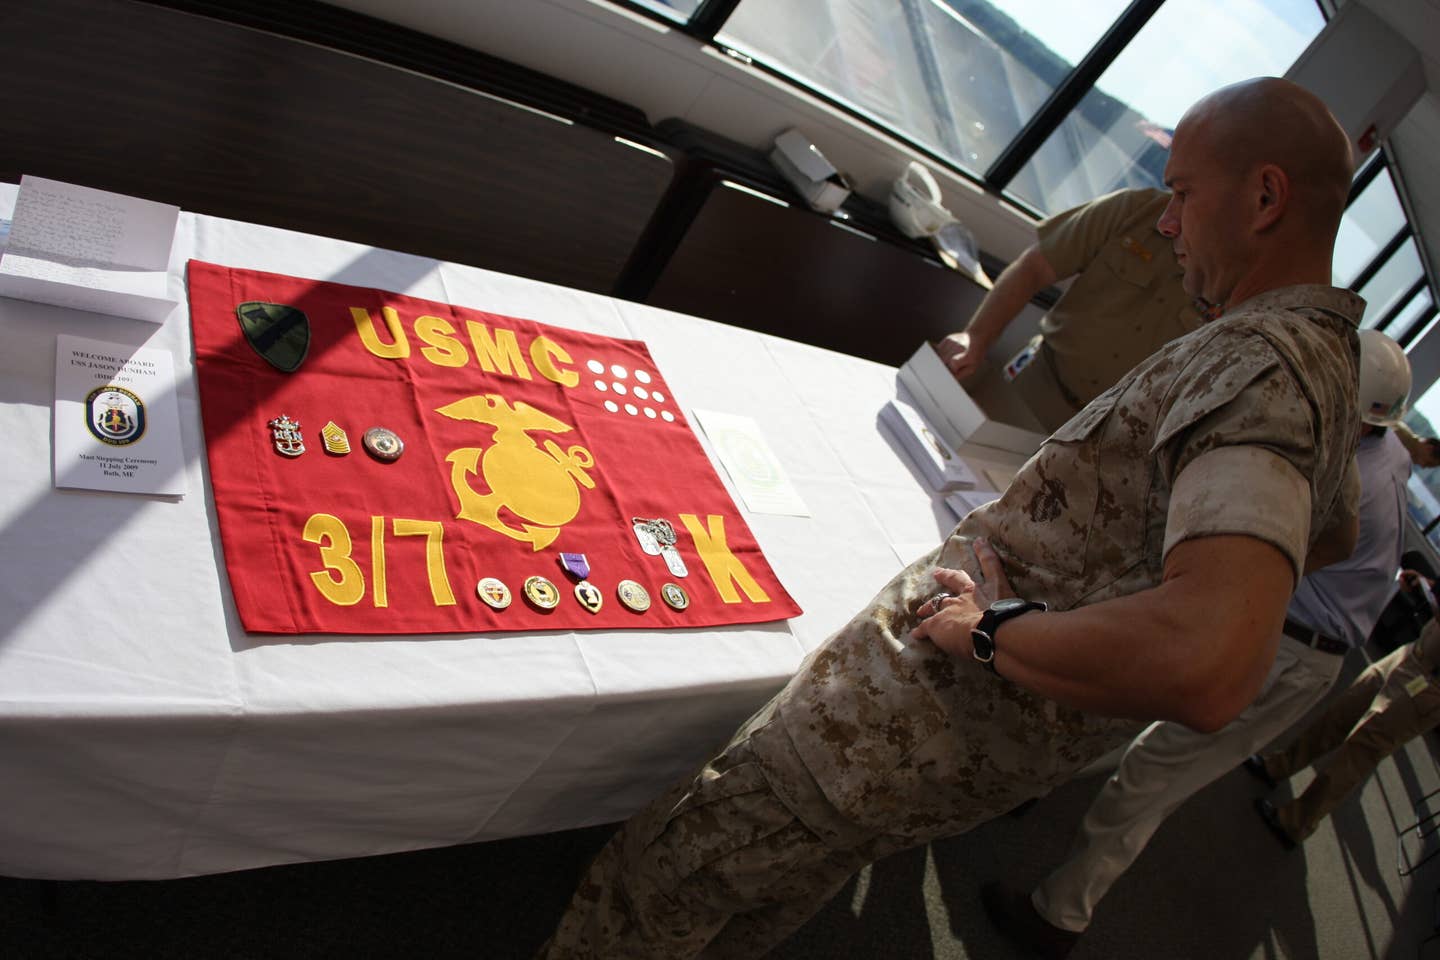 Maj. Trent A. Gibson, the executive officer for 2nd Battalion, 7th Marine Regiment, and Medal of Honor recipient Corporal Jason Dunham's former company commander, admires the display of items that were permanently sealed in the destroyer, the USS Jason Dunham.